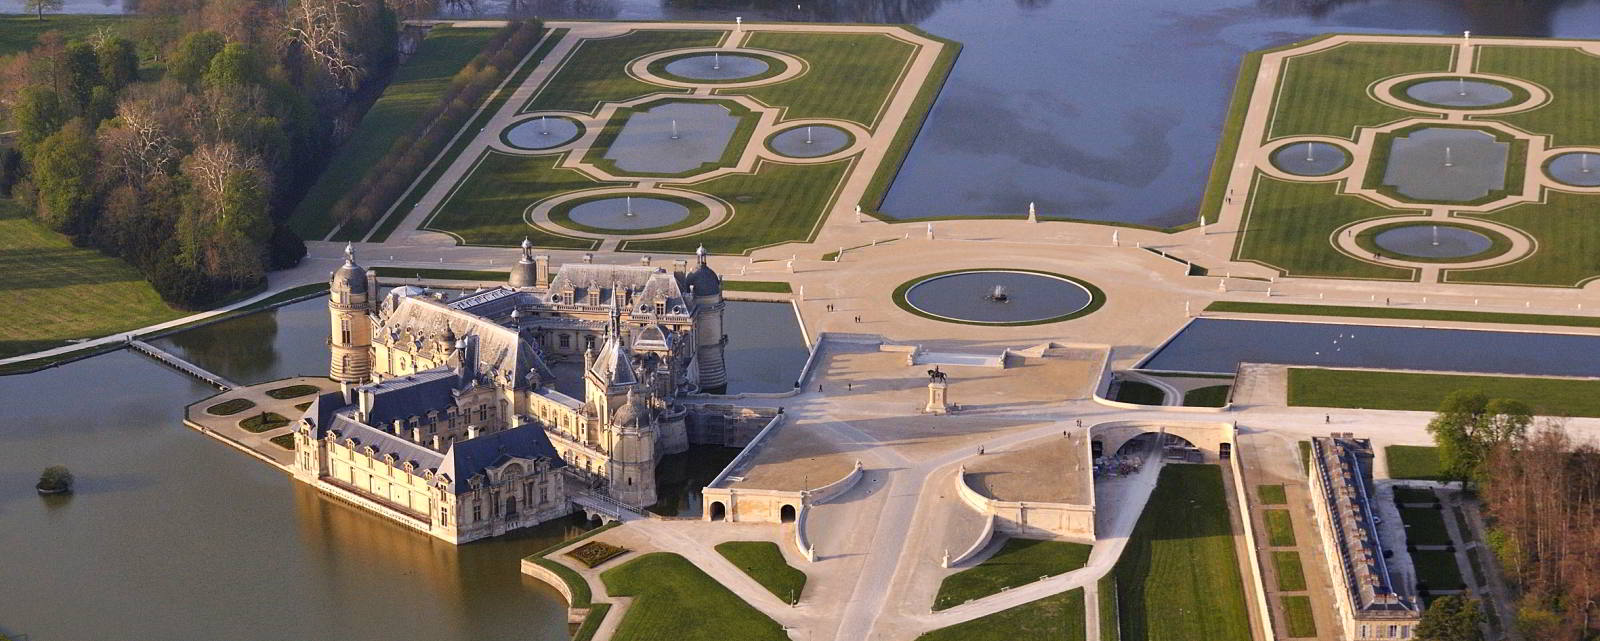 Bespoke Luxury Holidays in France Hauts-de-France. Chantilly Castle VIP Visit with In Luxe Travel France, the France Luxury Travel Specialist since 2007